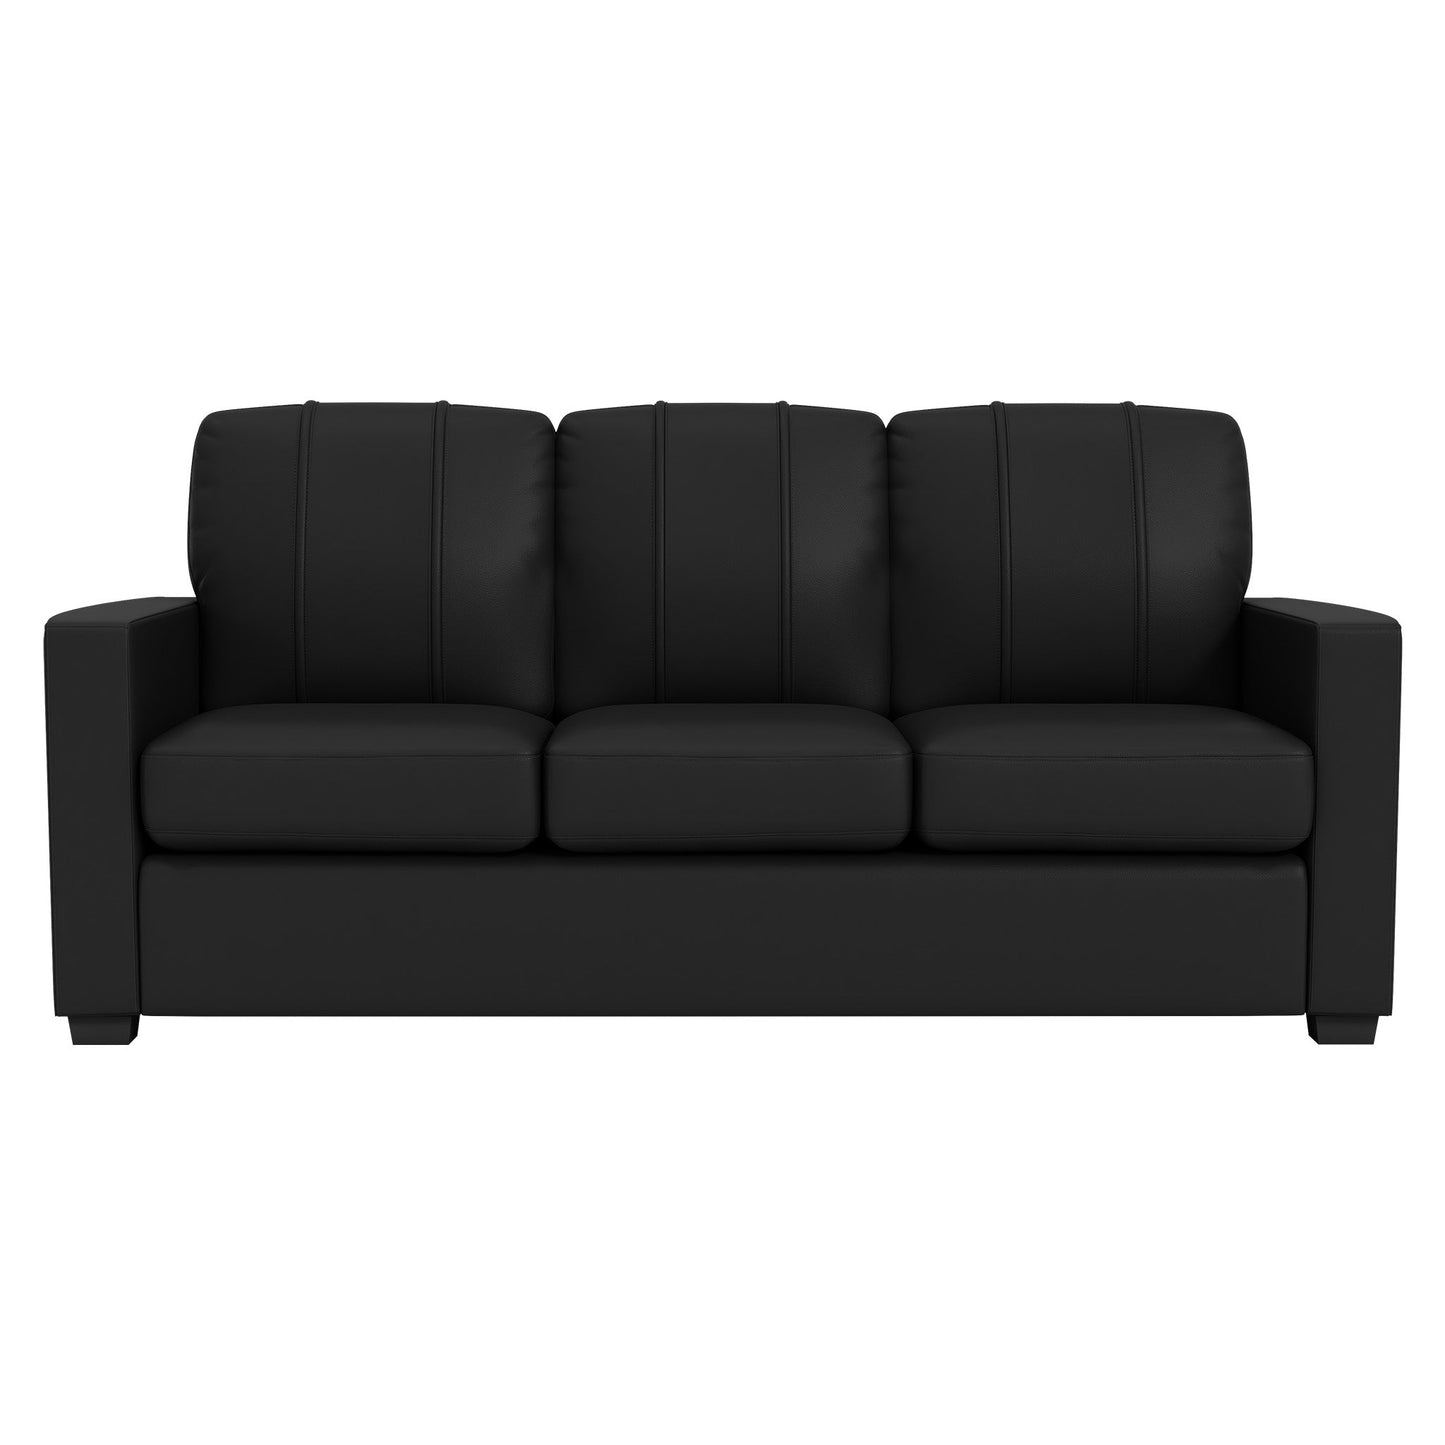 Silver Sofa with Celtics Crossover Gaming Wordmark White [CAN ONLY BE SHIPPED TO MASSACHUSETTS]